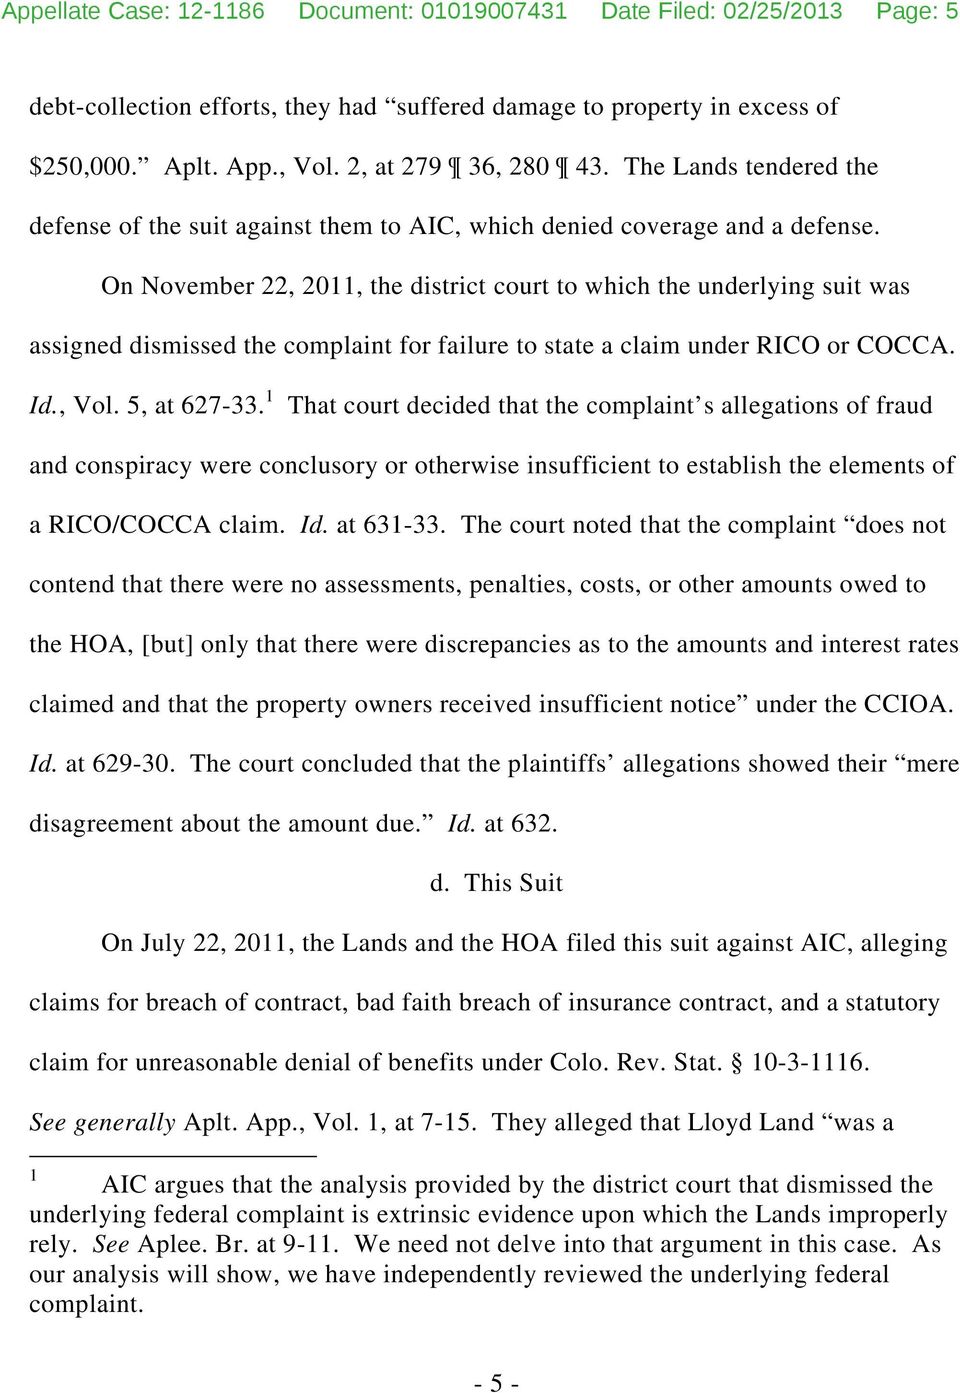 On November 22, 2011, the district court to which the underlying suit was assigned dismissed the complaint for failure to state a claim under RICO or COCCA. Id., Vol. 5, at 627-33.